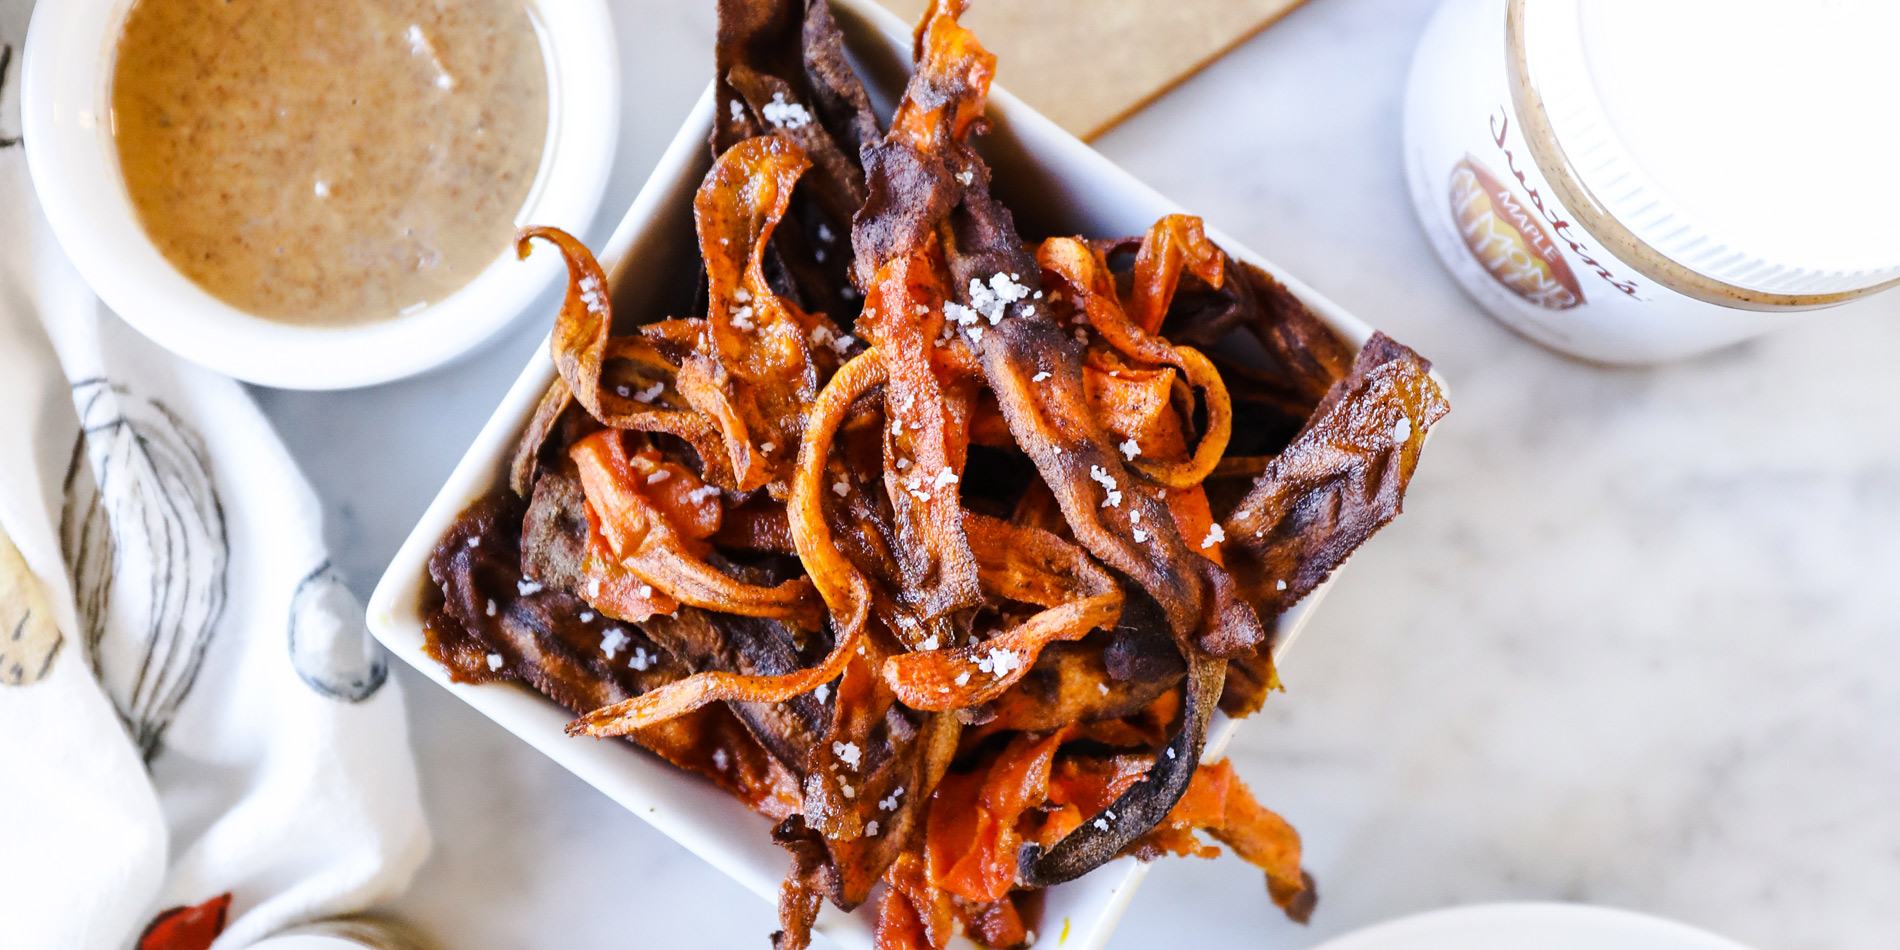 Crispy Carrot Fries with Cinnamon Maple Almond Dip with multiple sliced carrots and peanut butter jar on a white background